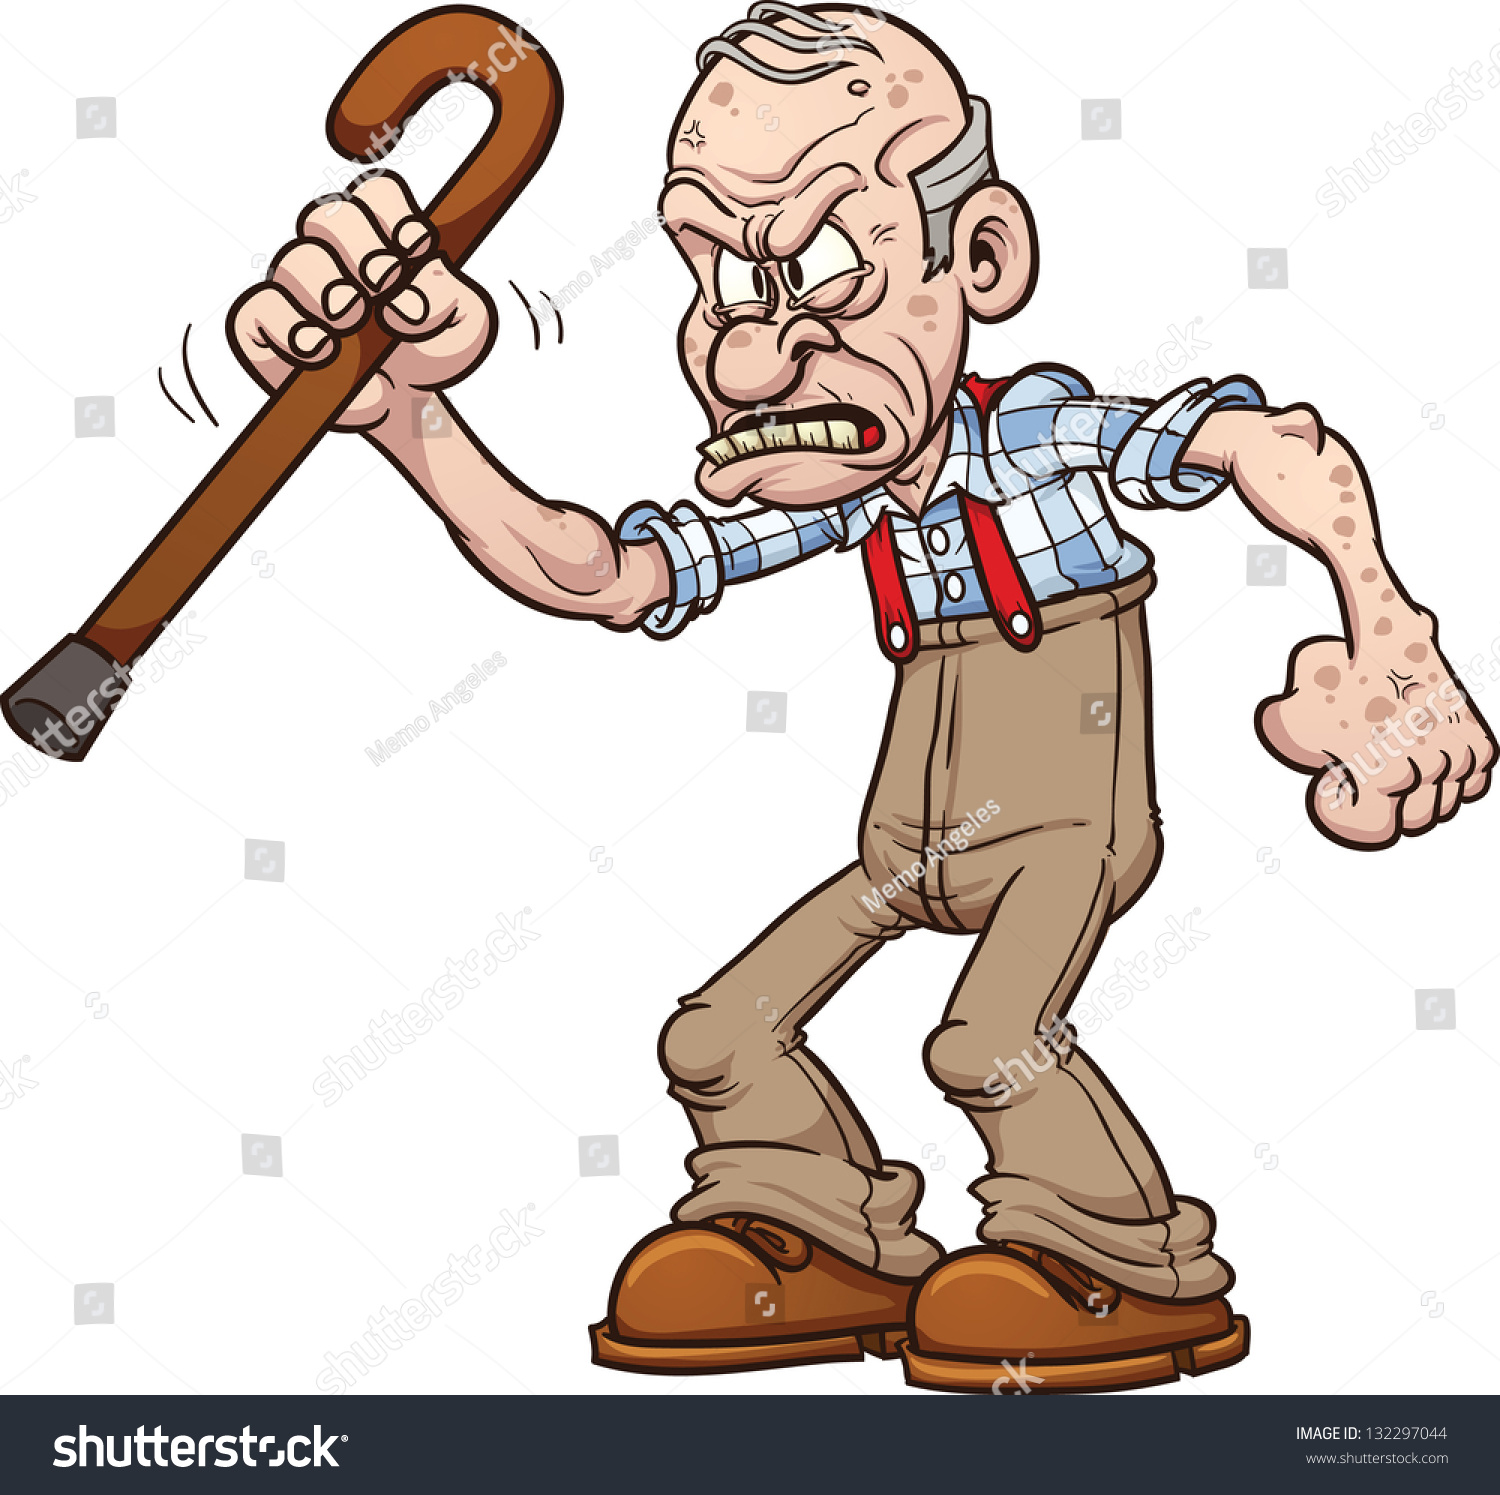 clipart of old man - photo #49